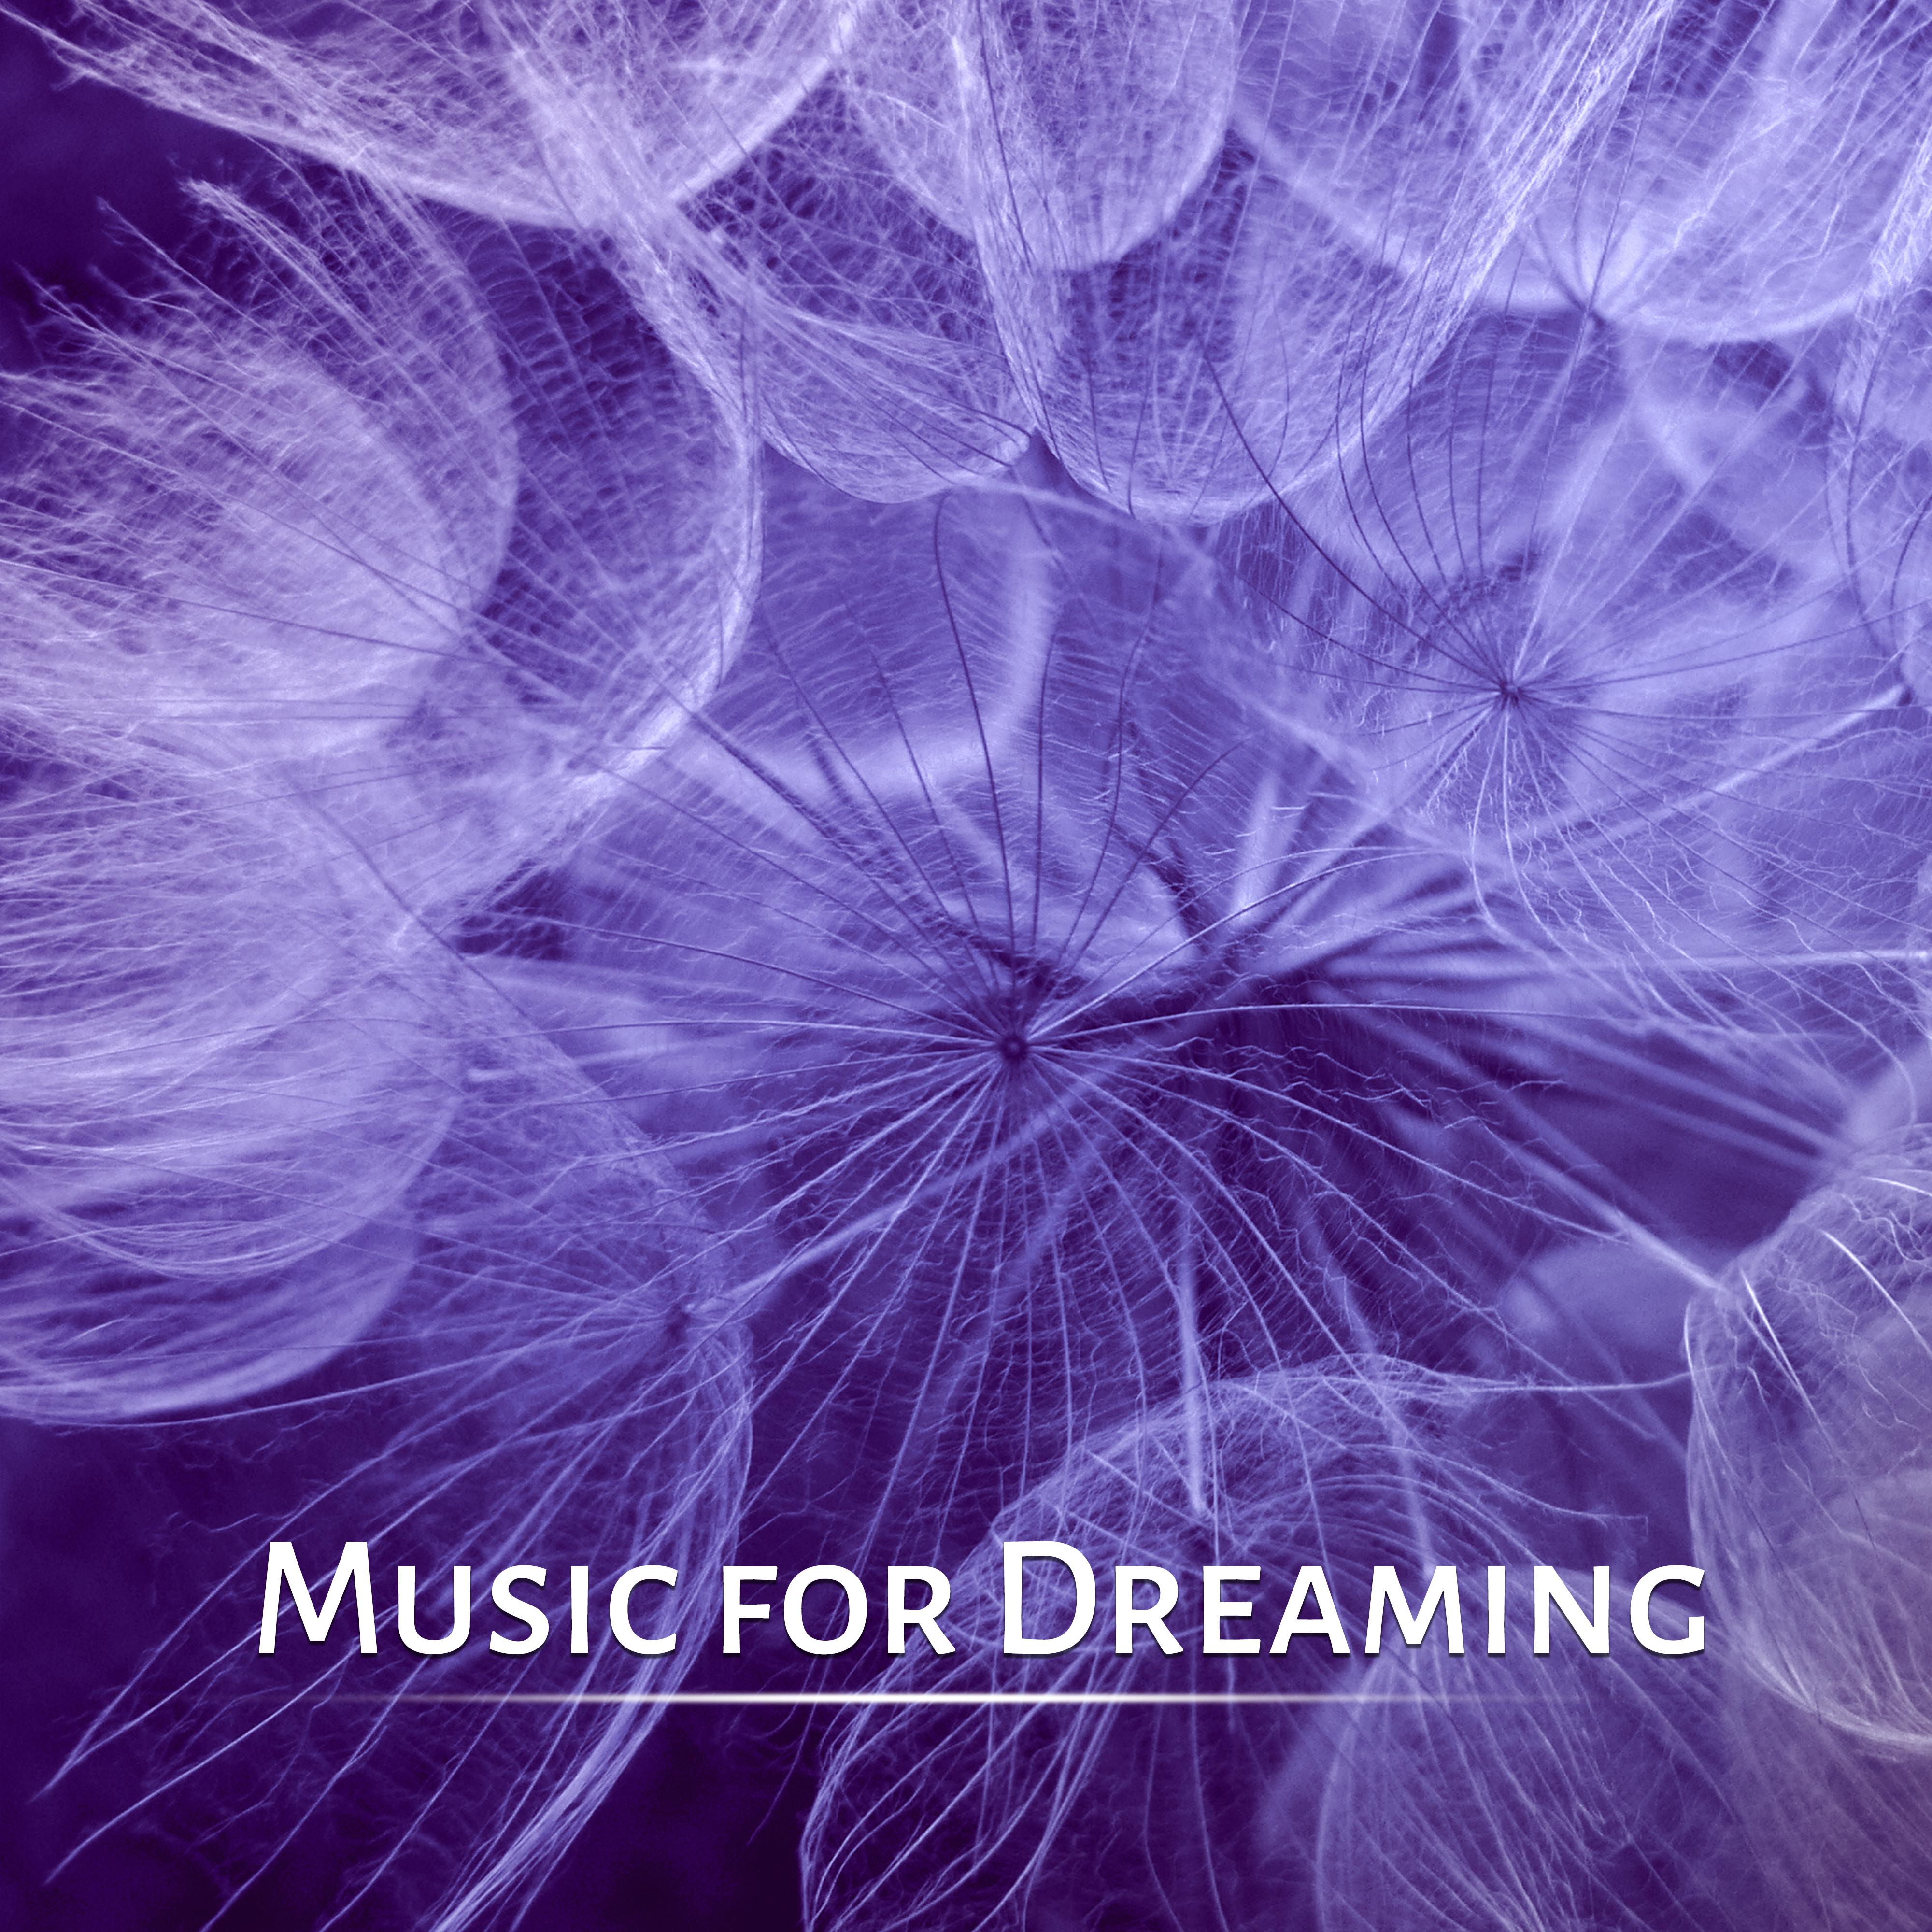 Music for Dreaming - Music to Help You Sleep, Calm Nature Sounds for Insomnia, Deep Sleep, Music for Baby Sleep & Relaxation